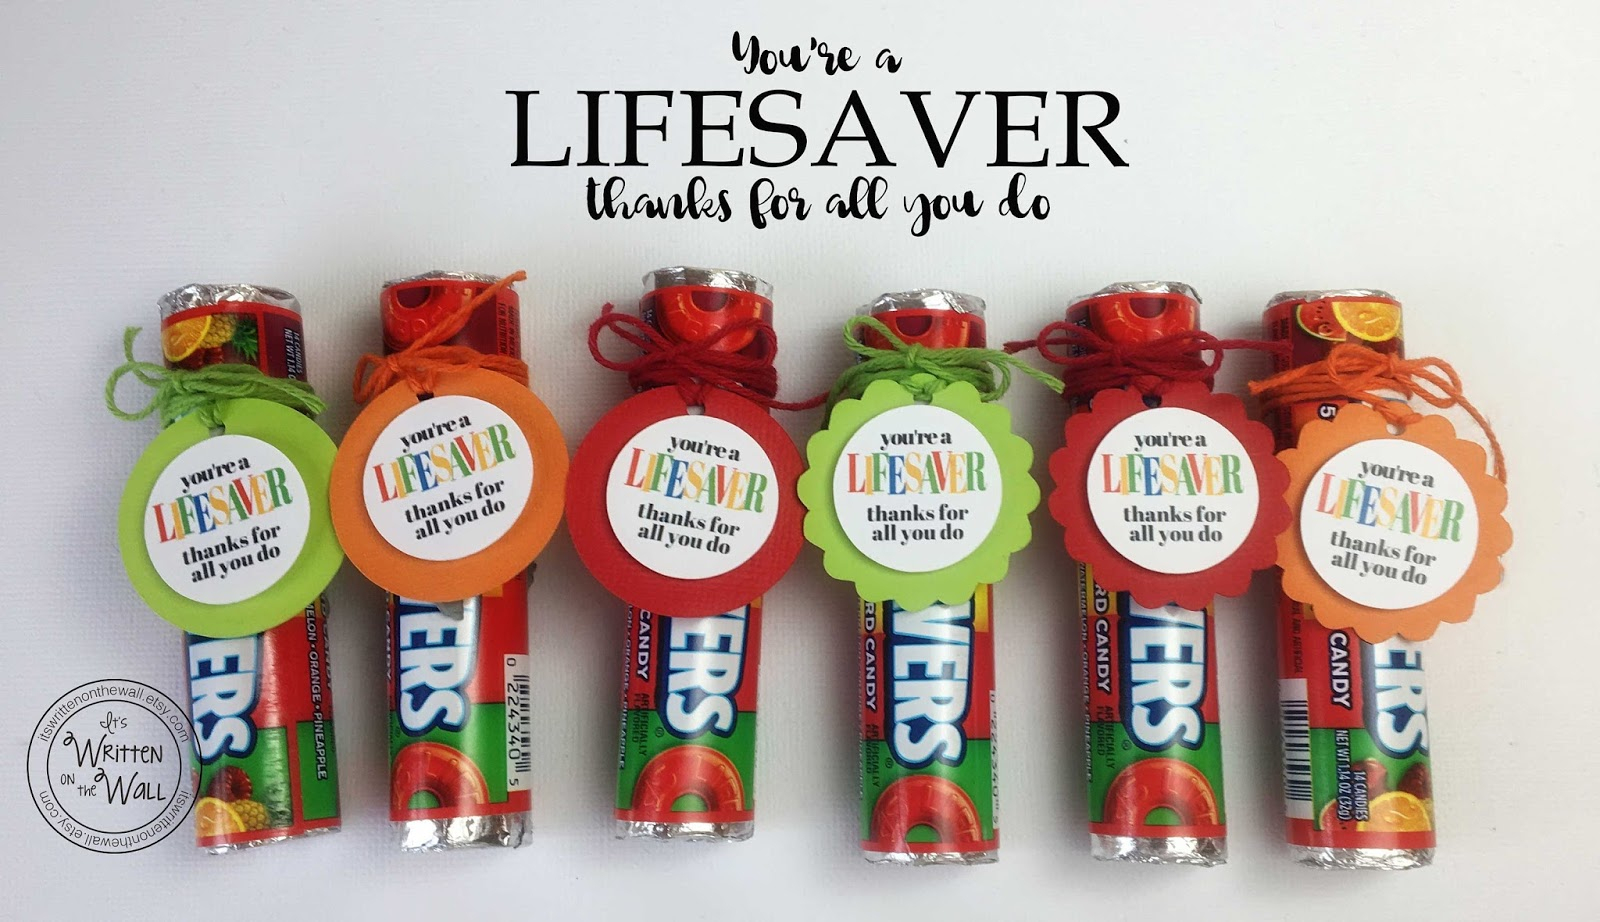 It&amp;#039;s Written On The Wall: You&amp;#039;re A Lifesaver—Thanks For All You Do - Free Printable Lifesaver Tags